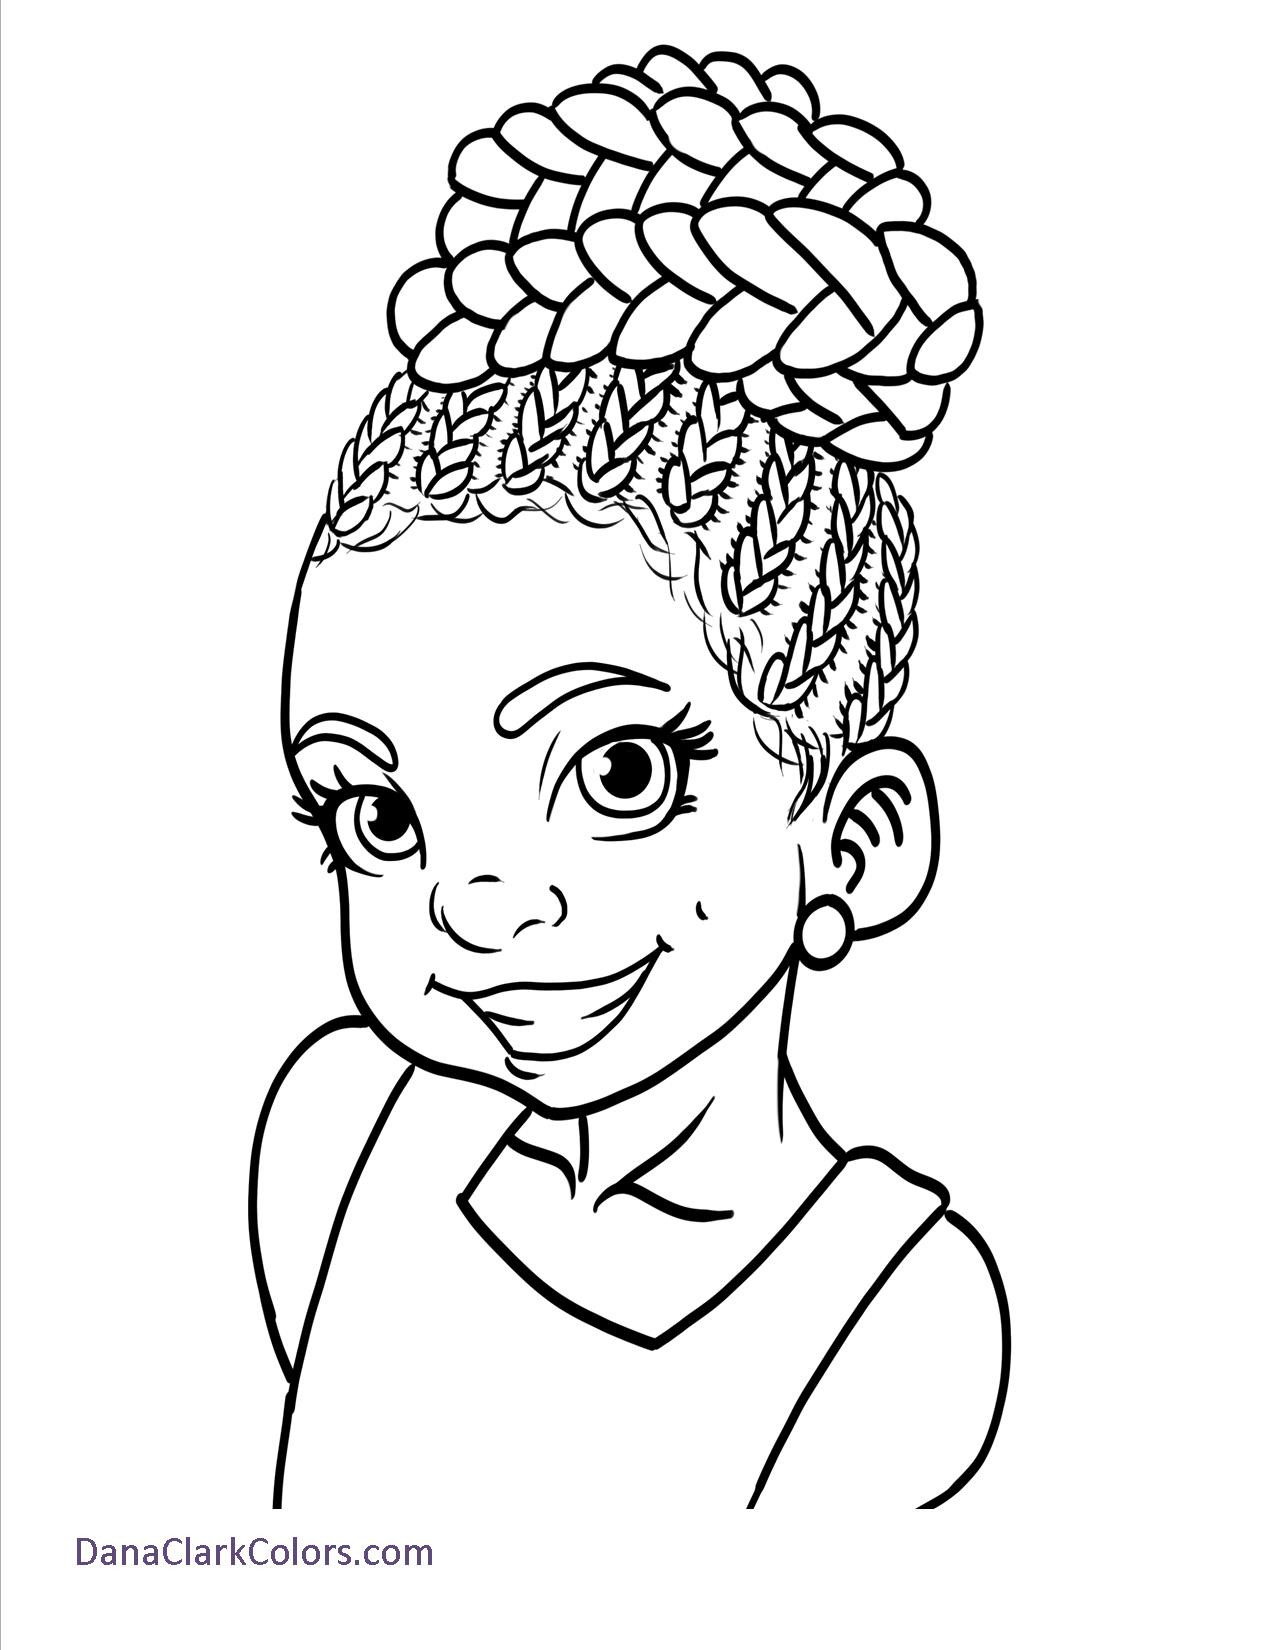 Coloring Pages For Black Girls
 Free Coloring Pages DanaClarkColors